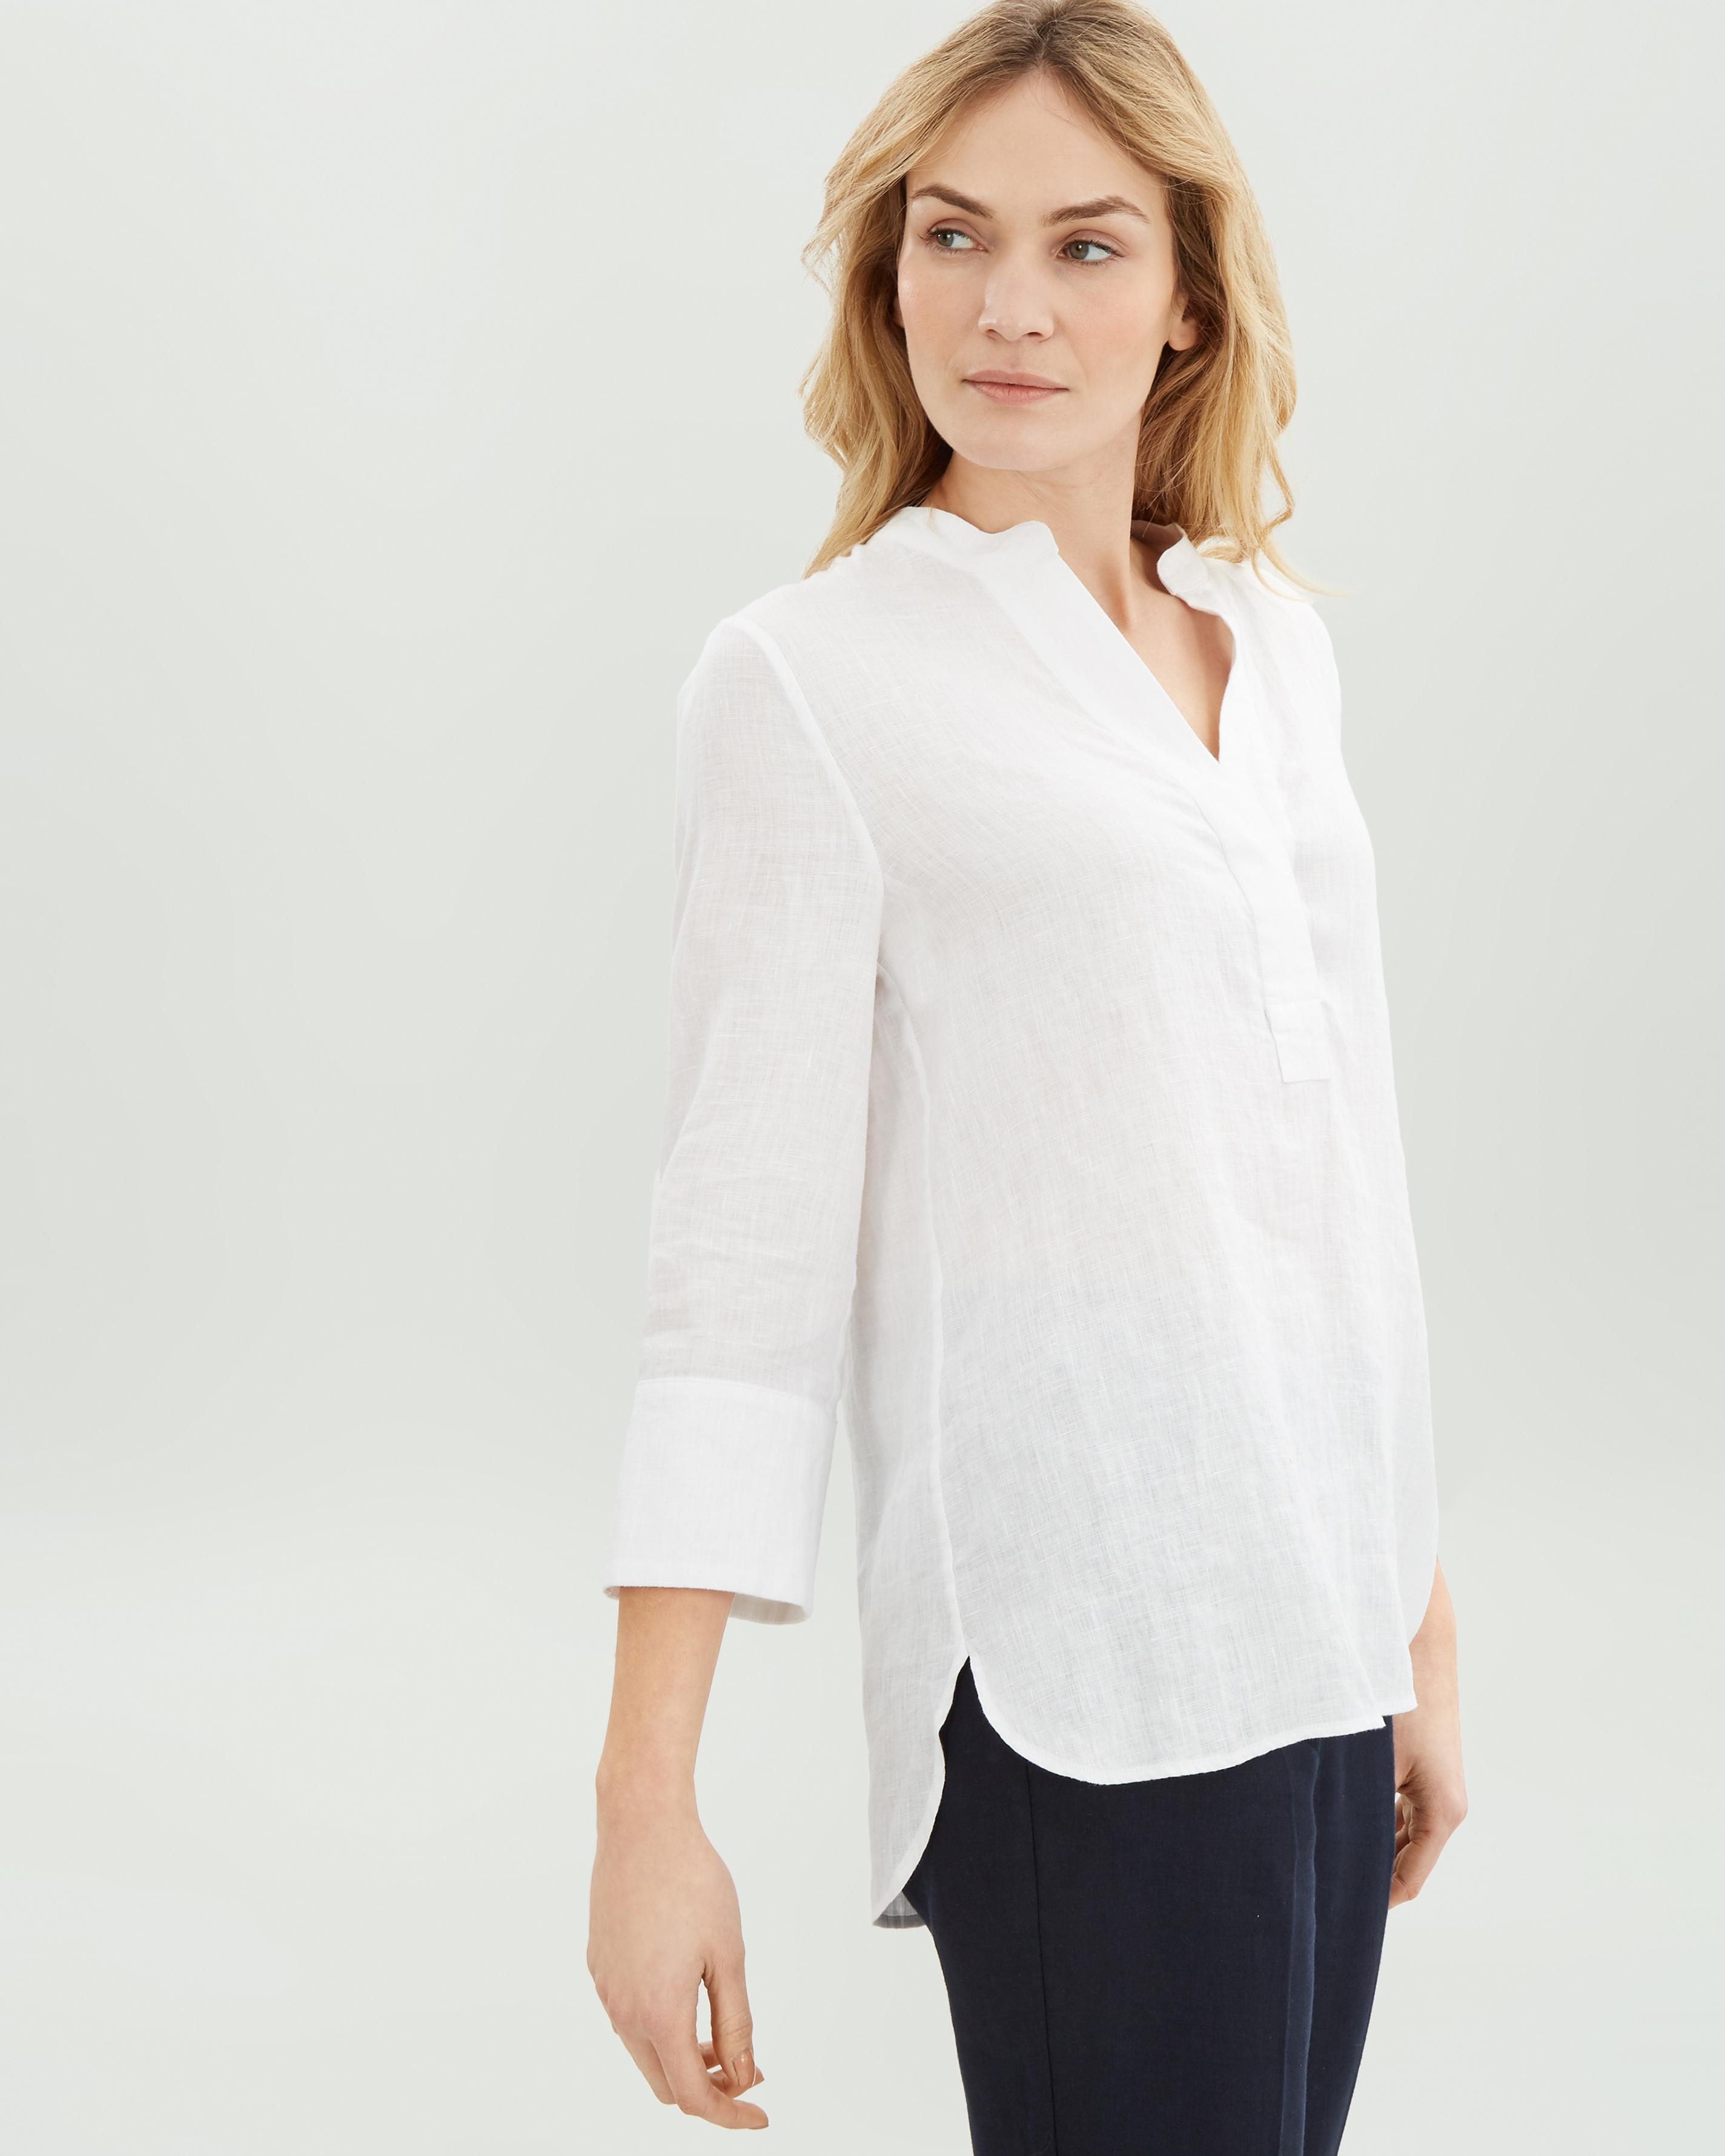 Lyst - Jaeger Linen Tunic in White